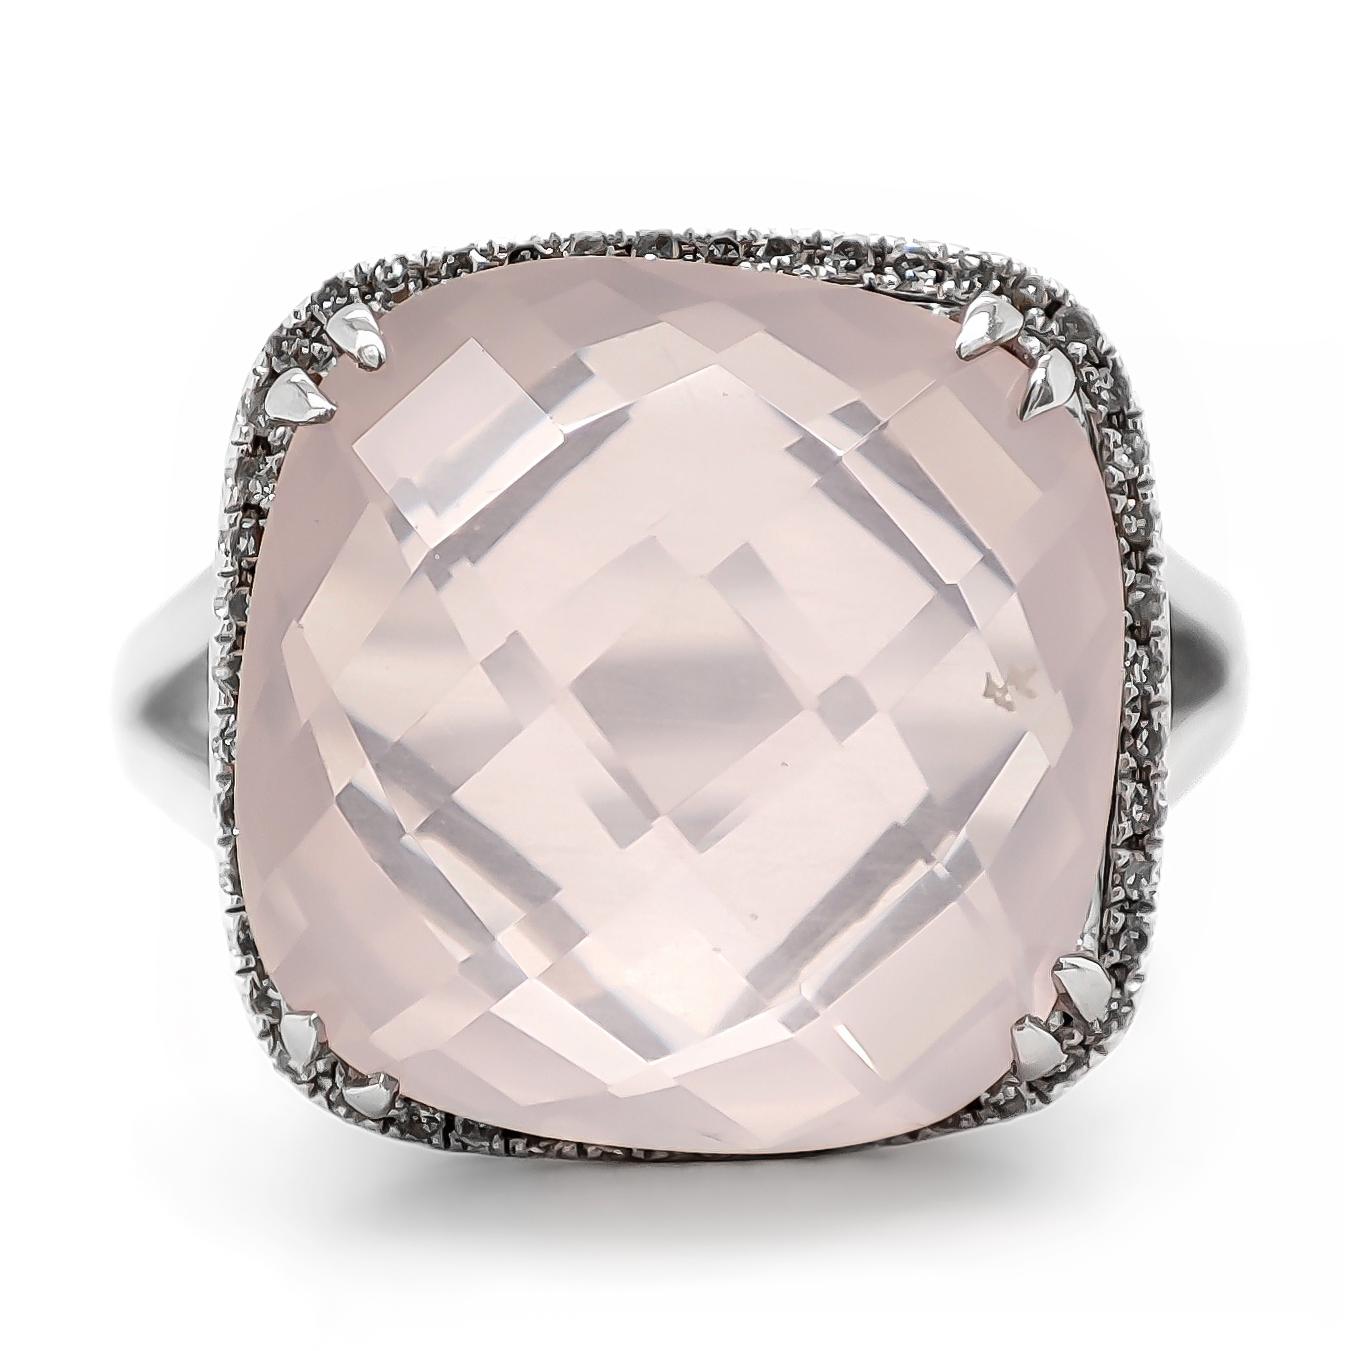 FOR US BUYER NO VAT

This beautiful piece features a 8.68 carat pink quartz as its centerpiece, adding a captivating burst of color to its design.

Enhancing the allure of the quartz are 52 diamonds, totaling 0.12 carats. These diamonds exhibit a